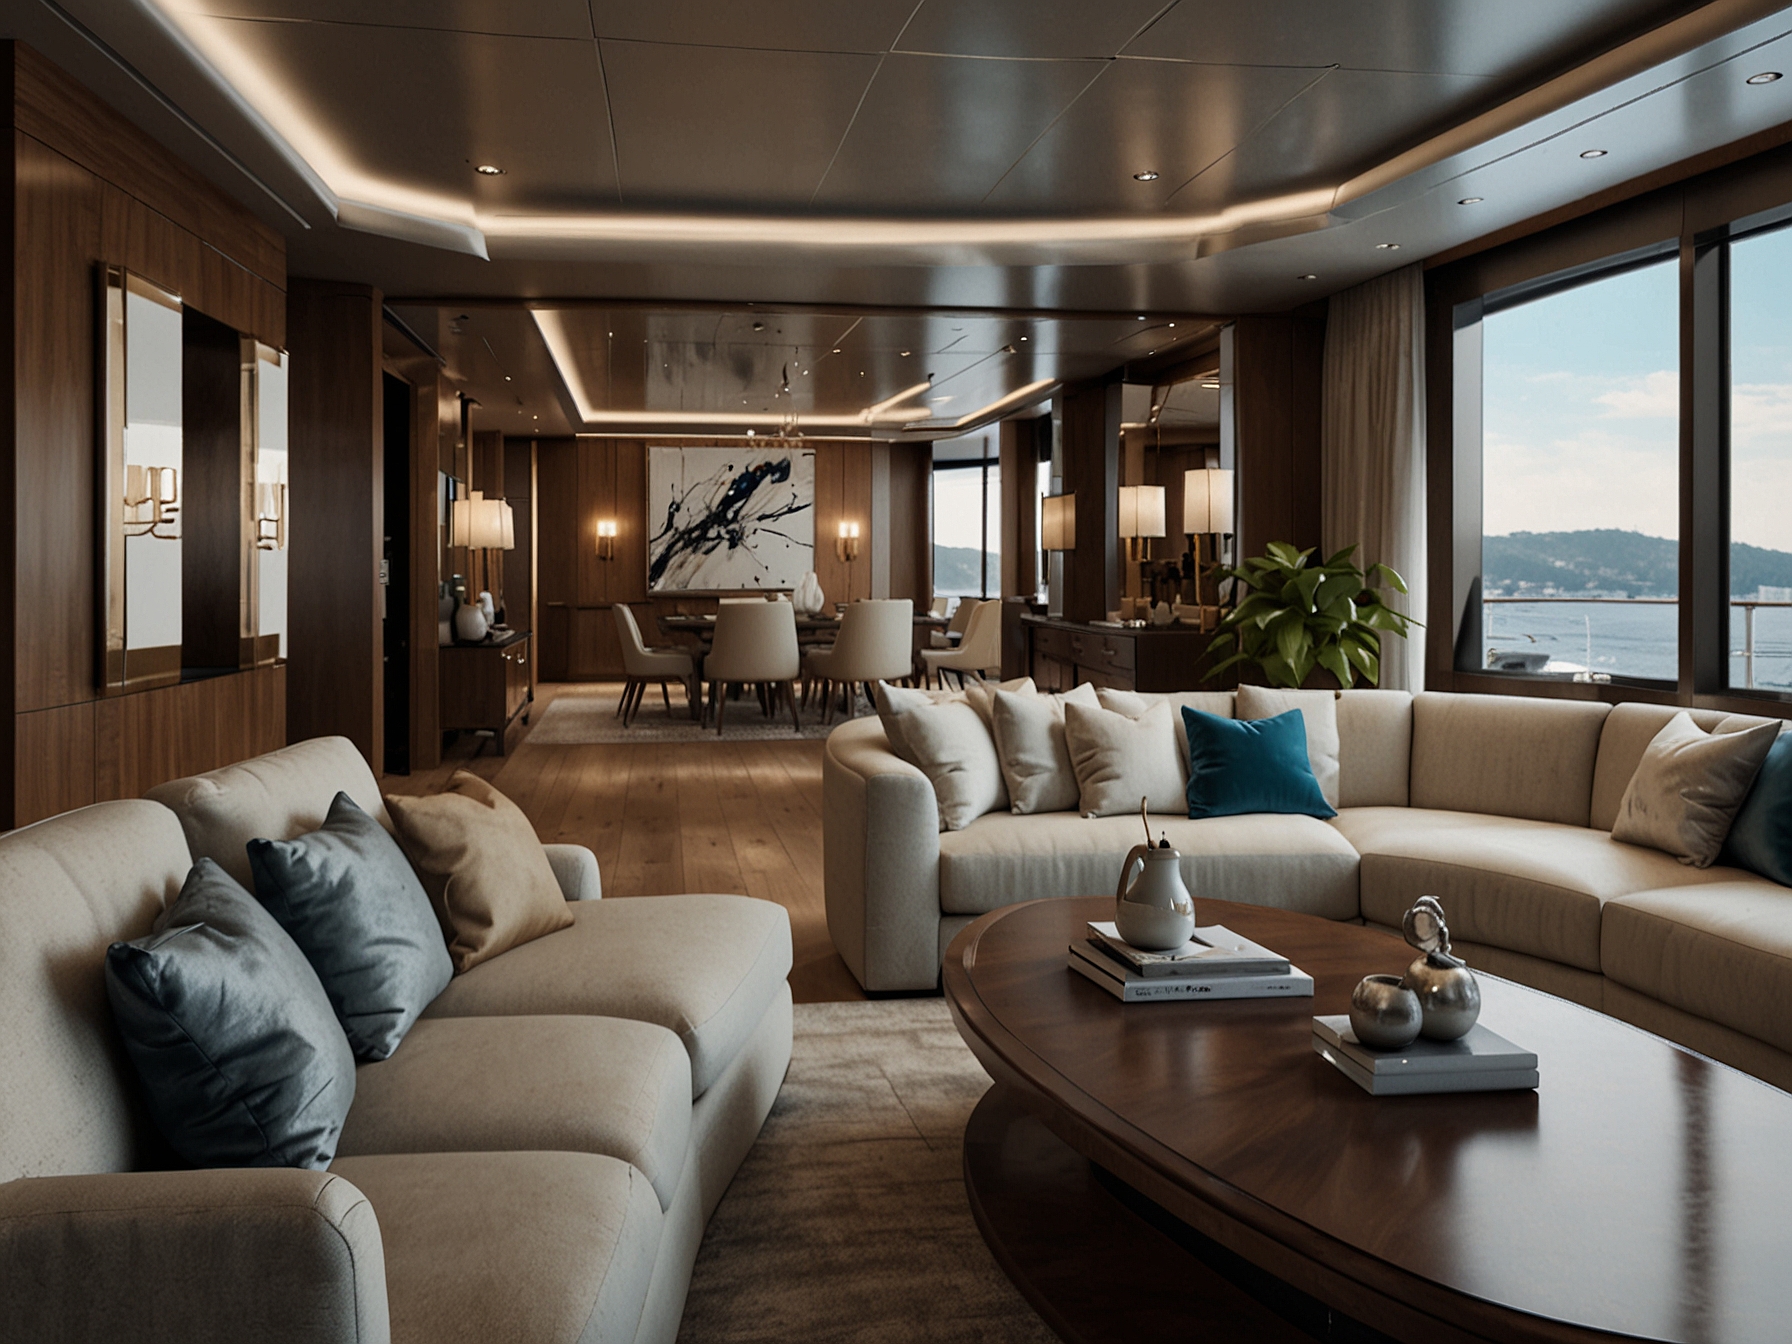 Inside the CLX99 Superyacht, the main salon boasts plush furnishings, handcrafted woodwork, and panoramic windows, creating a luxurious and inviting atmosphere.